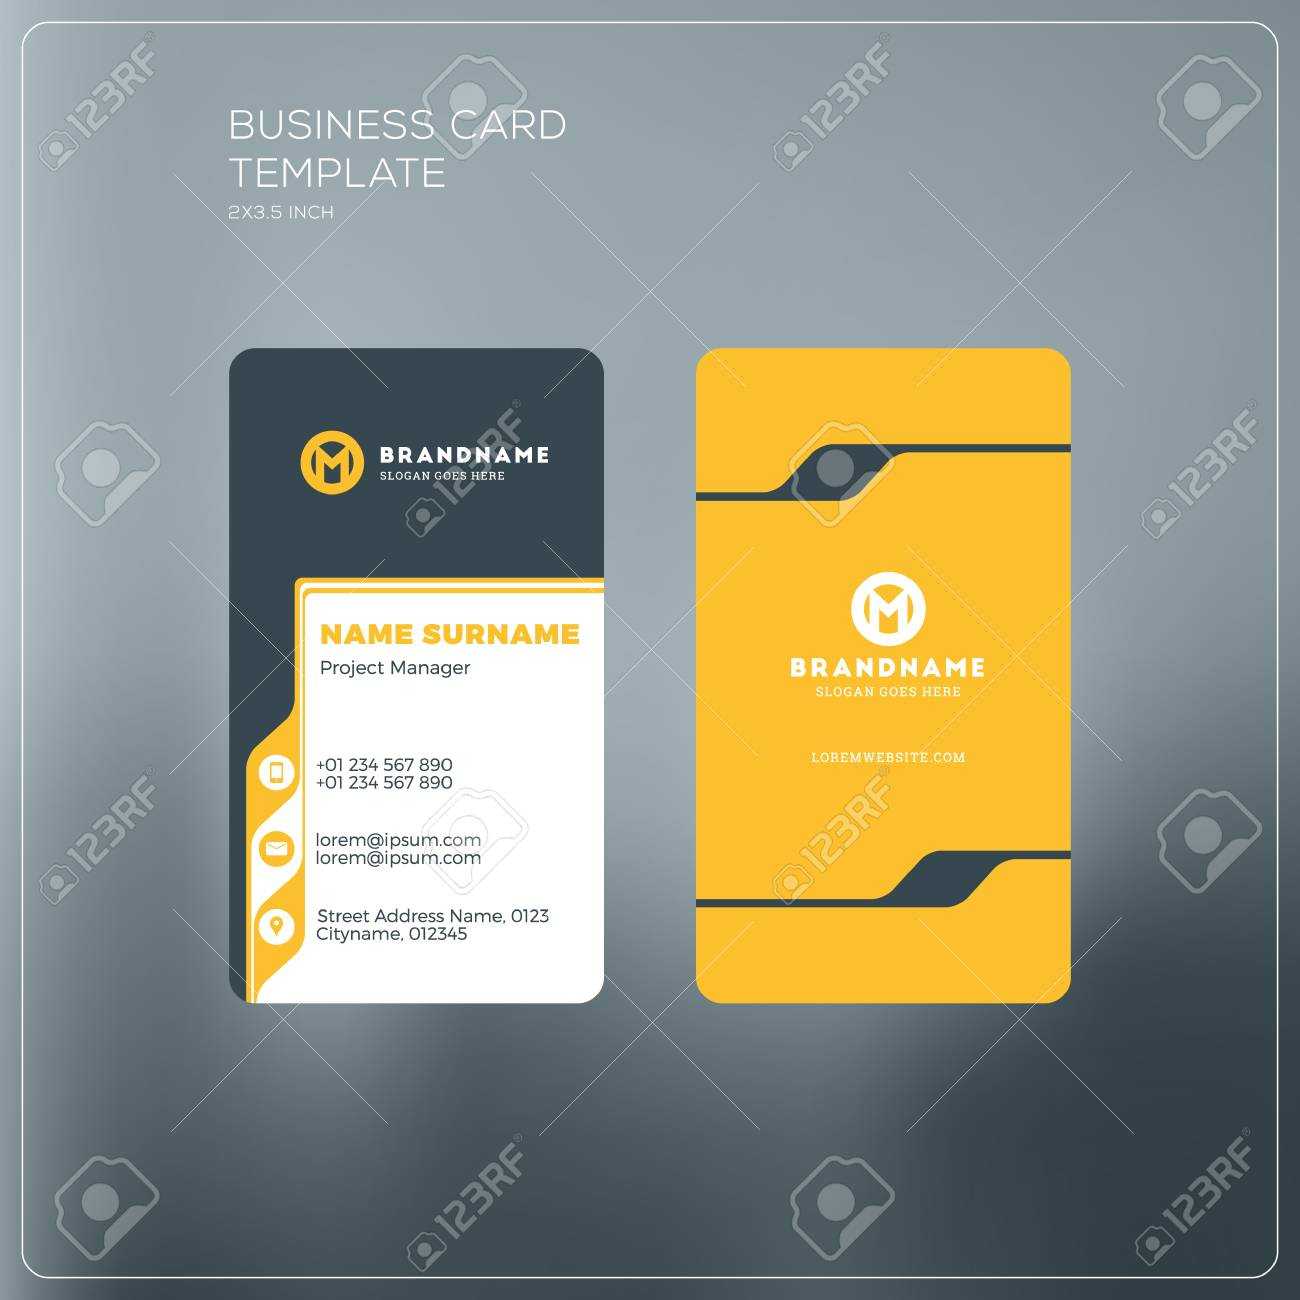 Personal Business Cards Template With Regard To Google Search Business Card Template